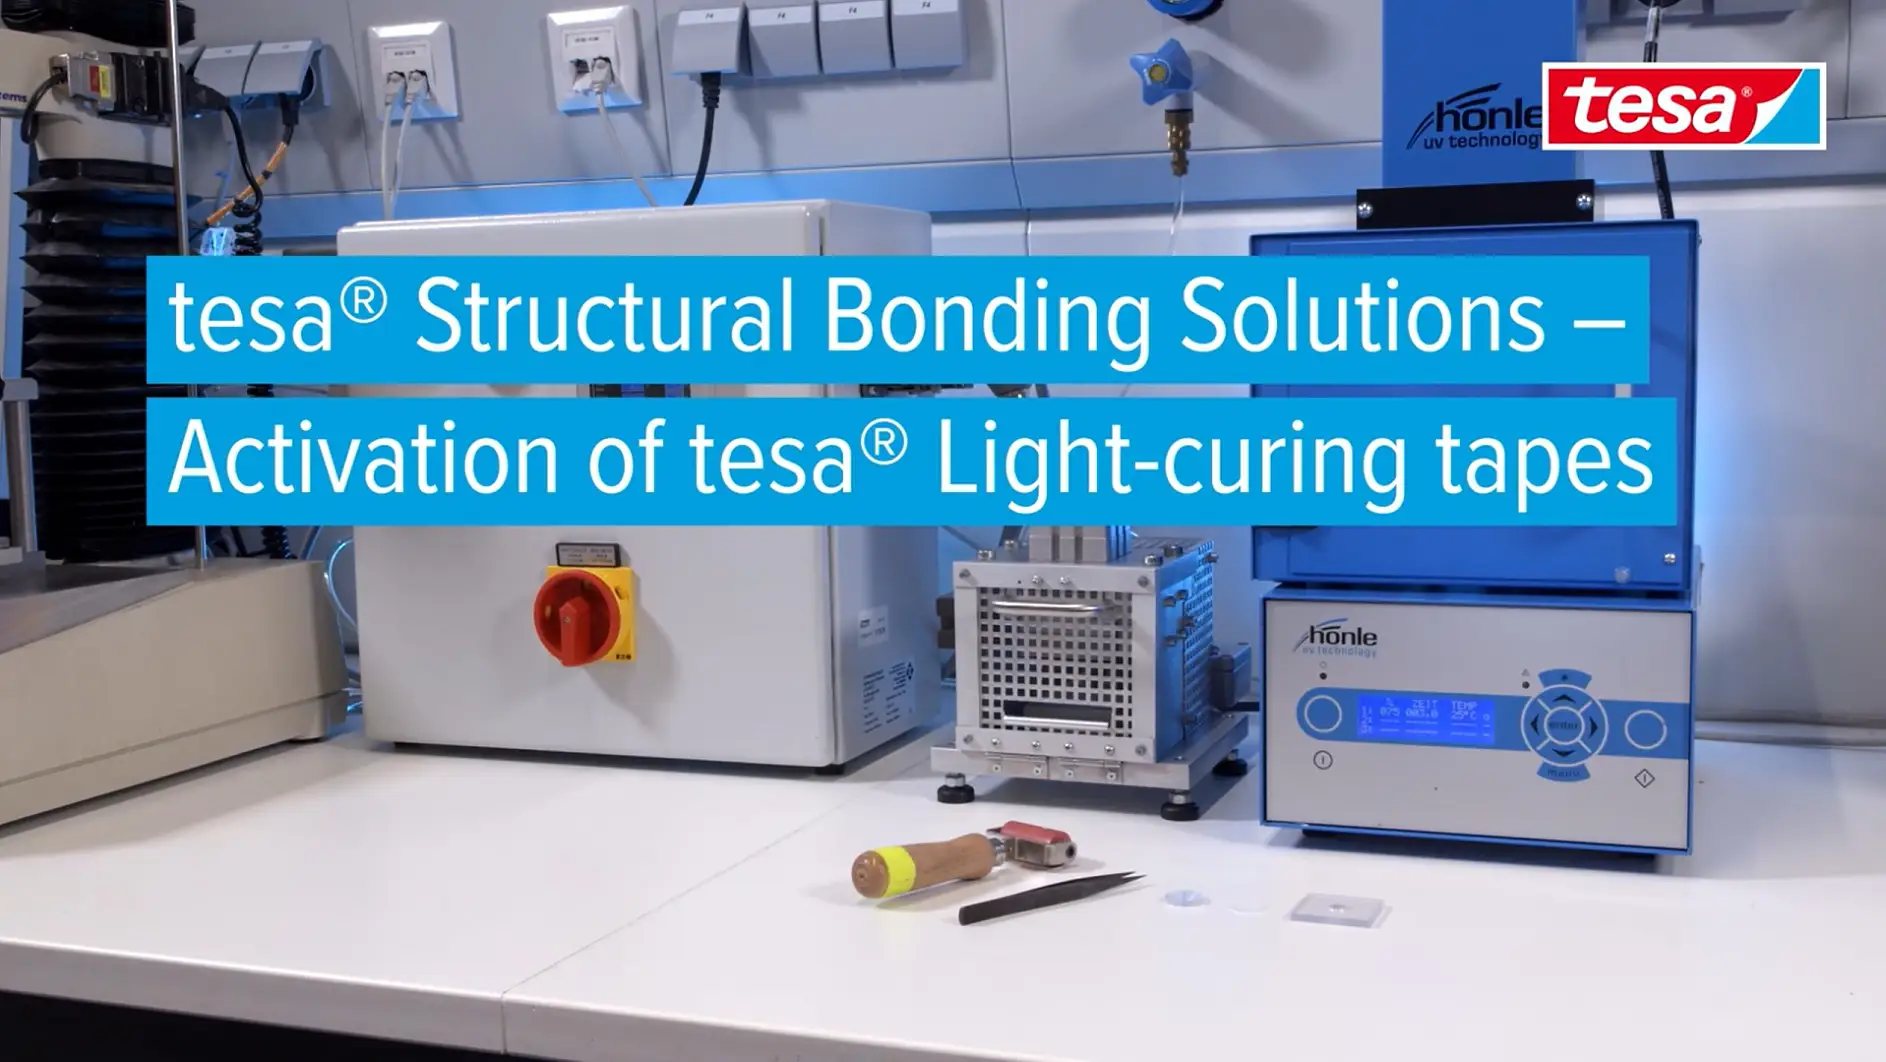 tesa® Structural bonding solutions - Activation of tesa® Light-curing tapes (1)